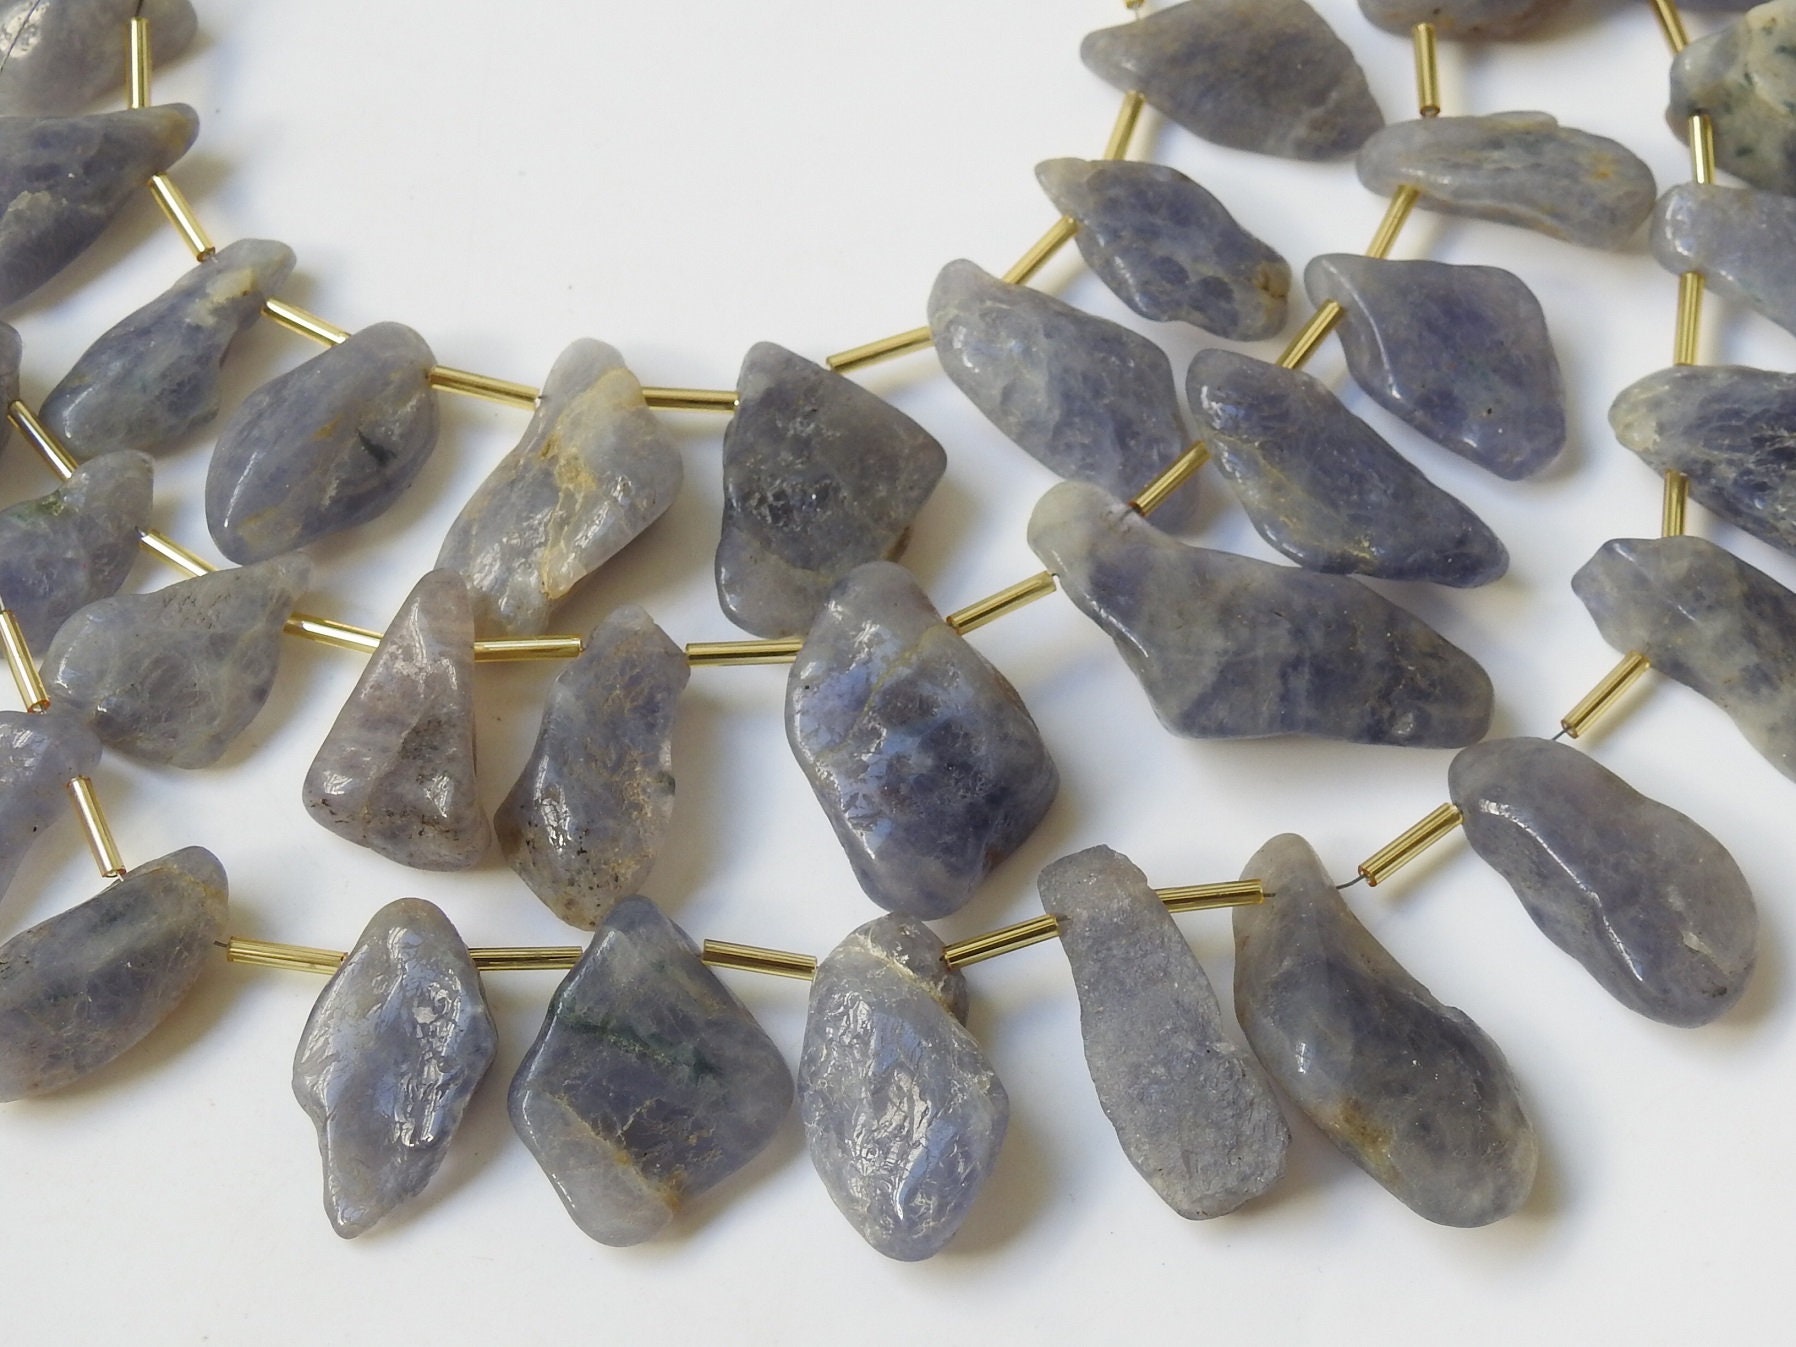 Iolite Rough Bead,Briolettes,Slab,Slice,Polished,Crystals,Minerals,Loose Raw 12Piece 28X18To22X14MM Approx Wholesaler,Supplies R5 | Save 33% - Rajasthan Living 12